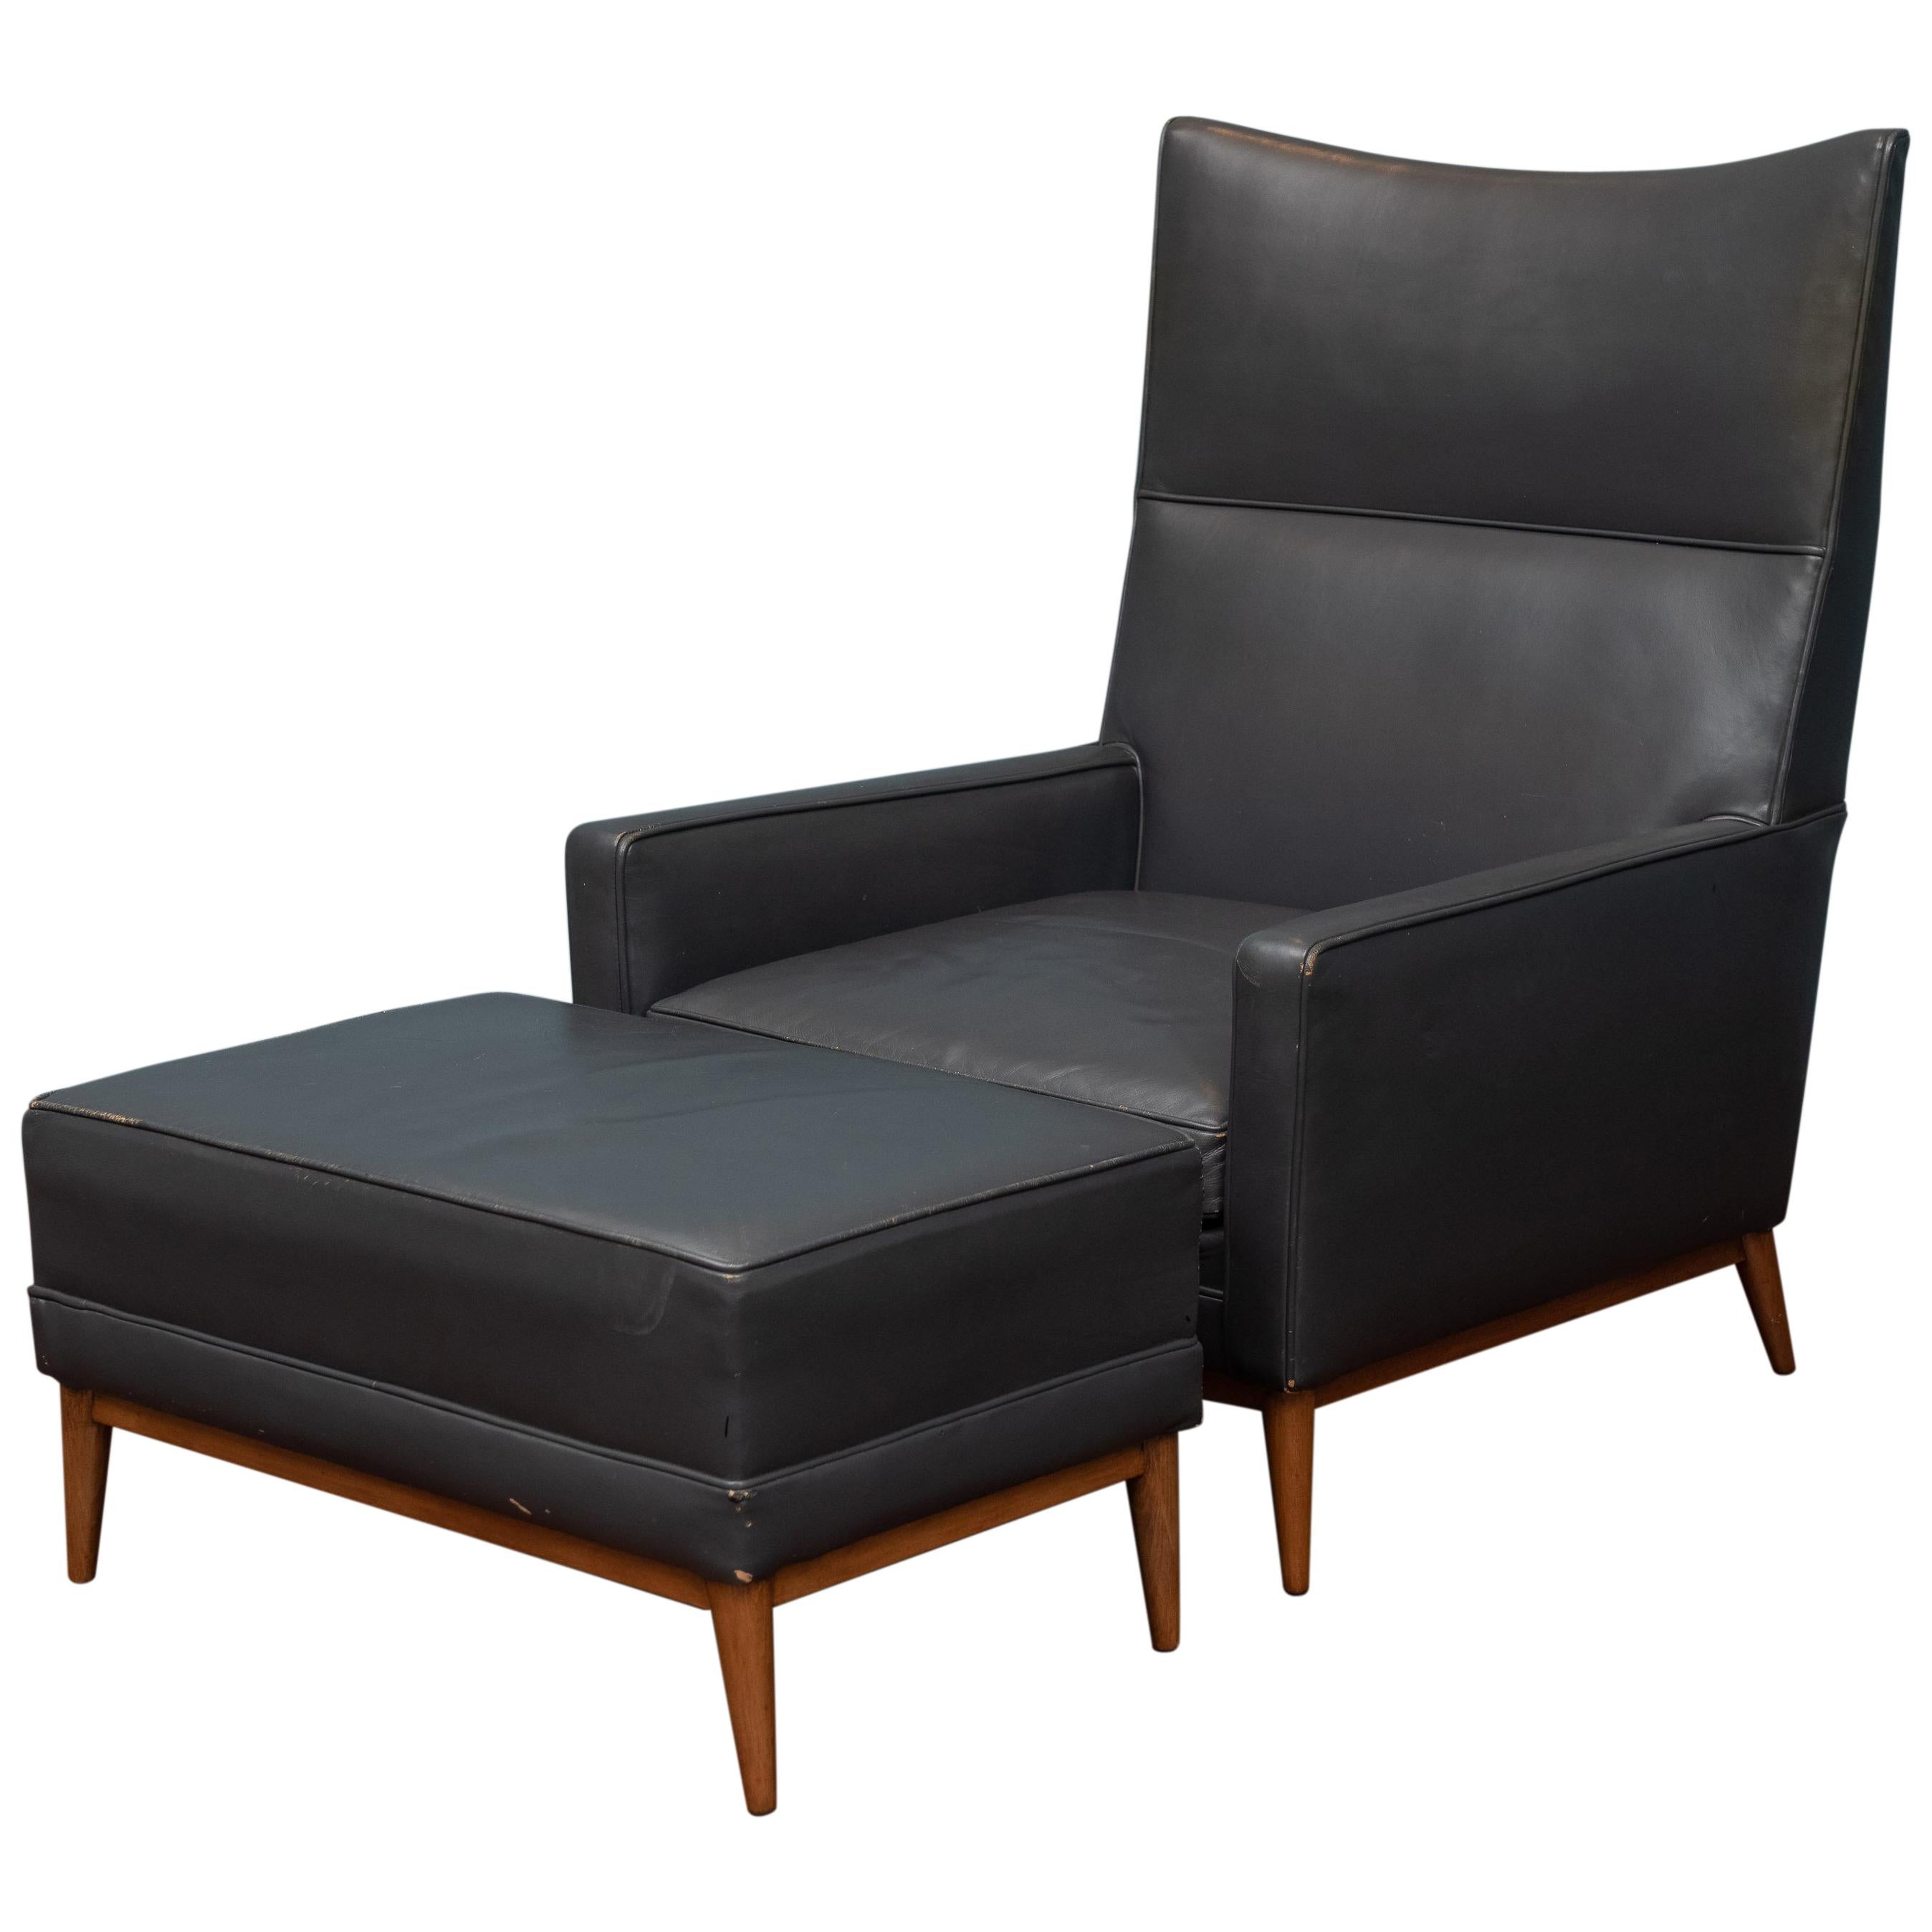 Paul McCobb Directional Lounge Chair and Ottoman, Model 314